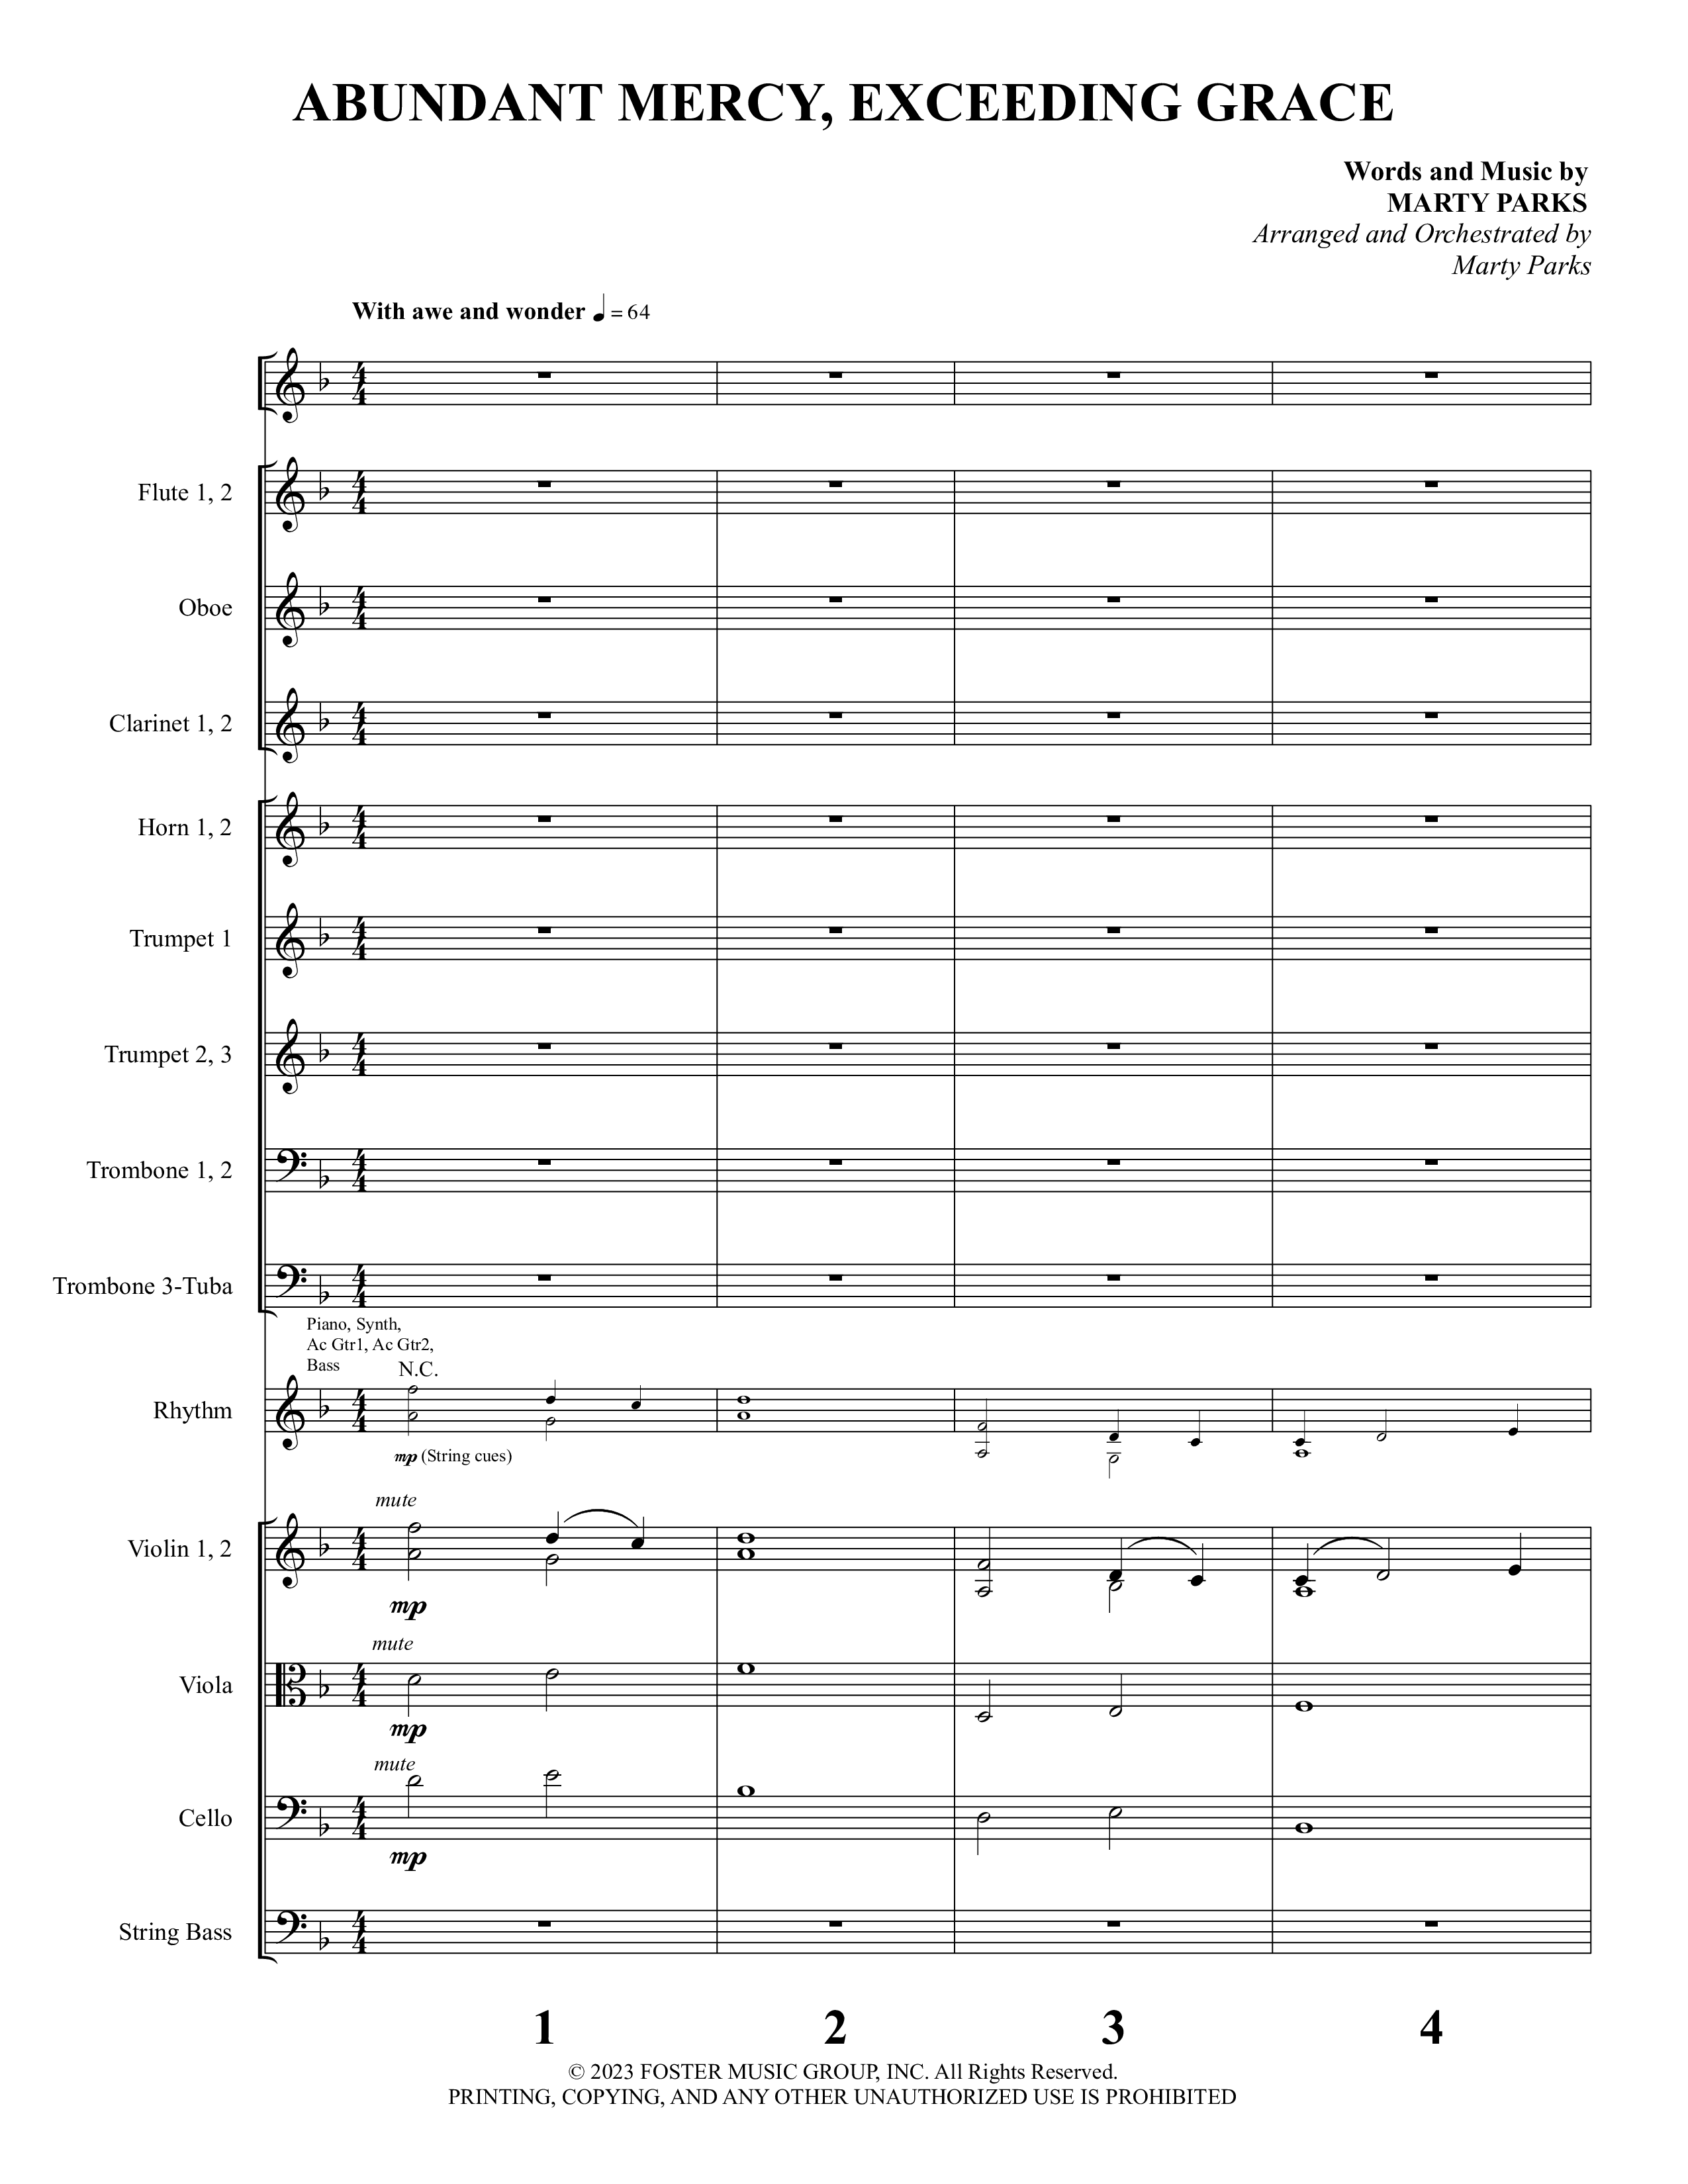 Abundant Mercy Exceeding Grace (Choral Anthem SATB) Conductor's Score (Foster Music Group / Arr. Marty Parks)